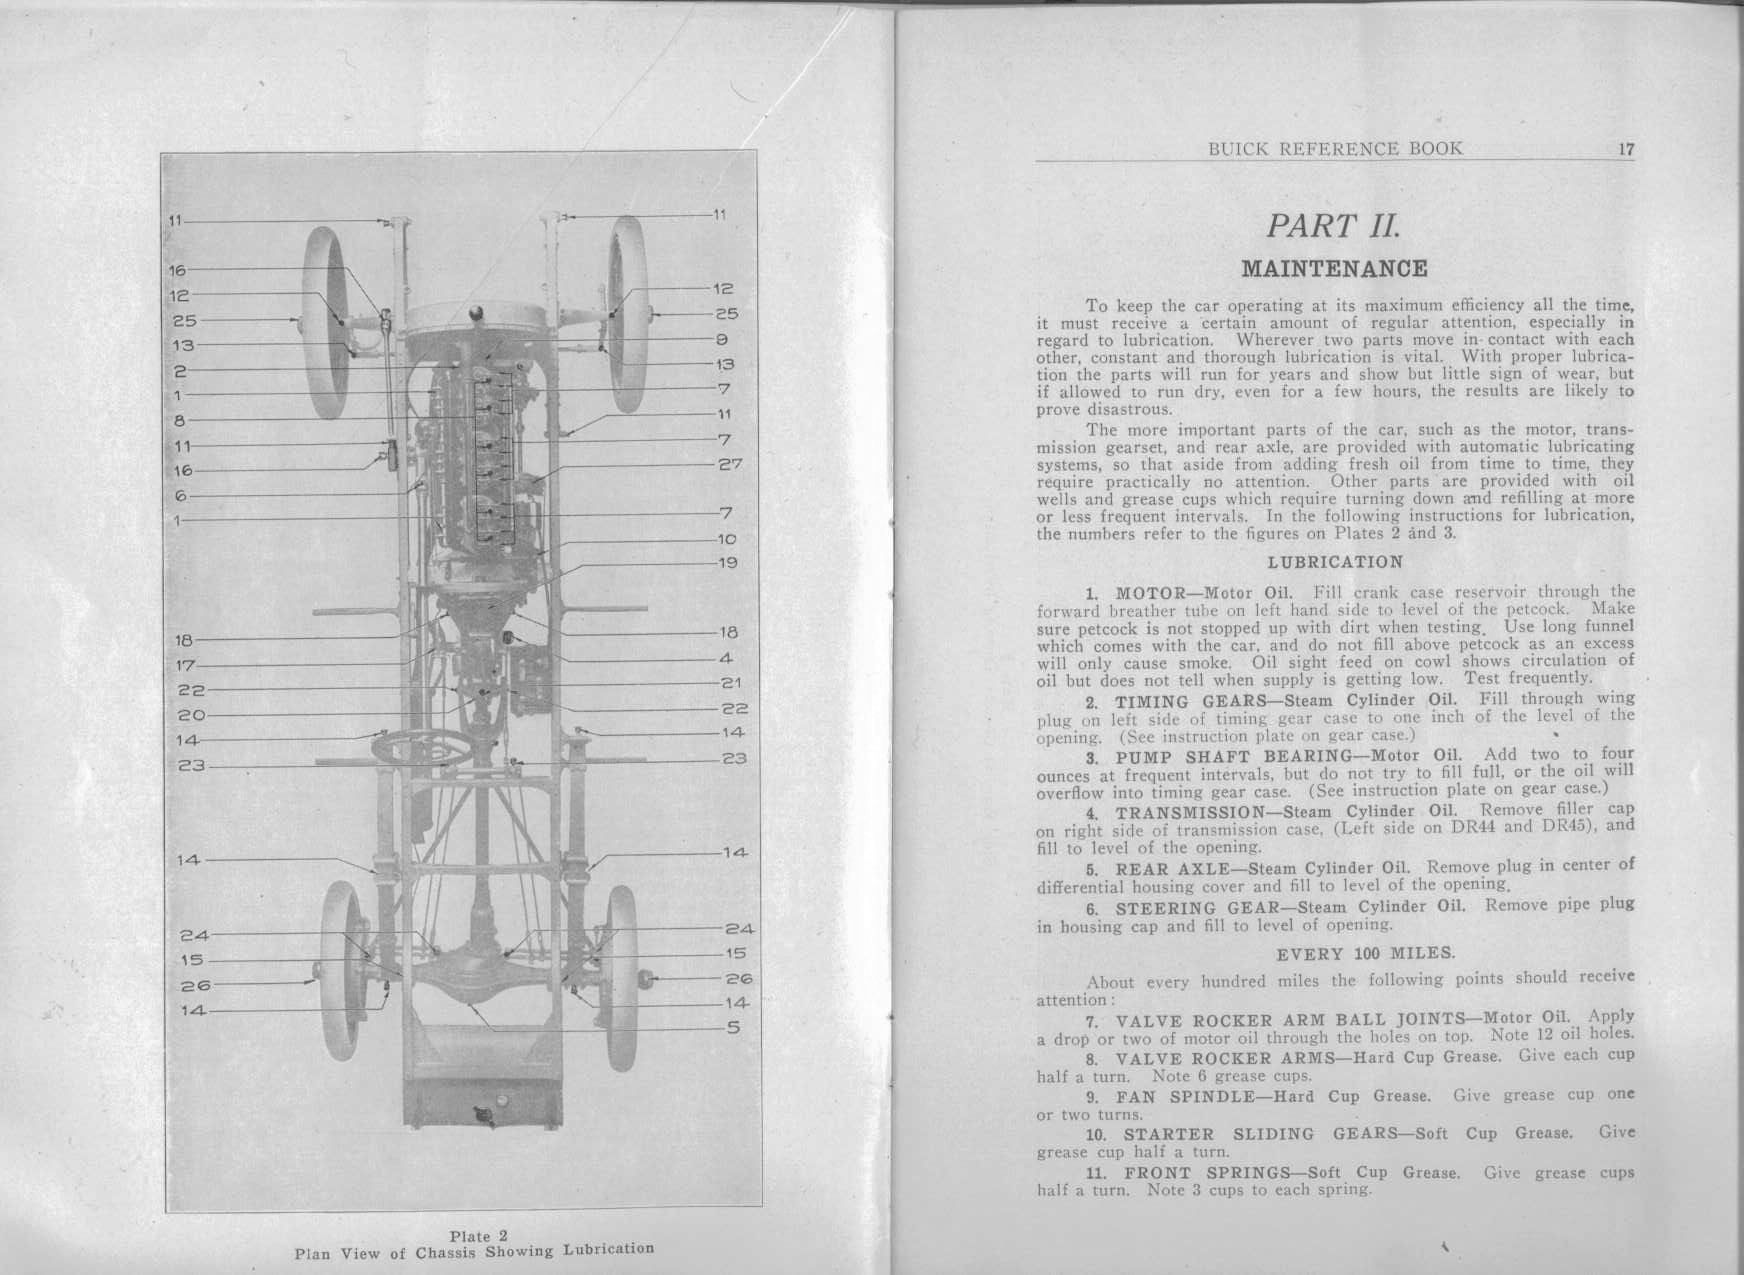 1916 Buick Reference Book-16-17